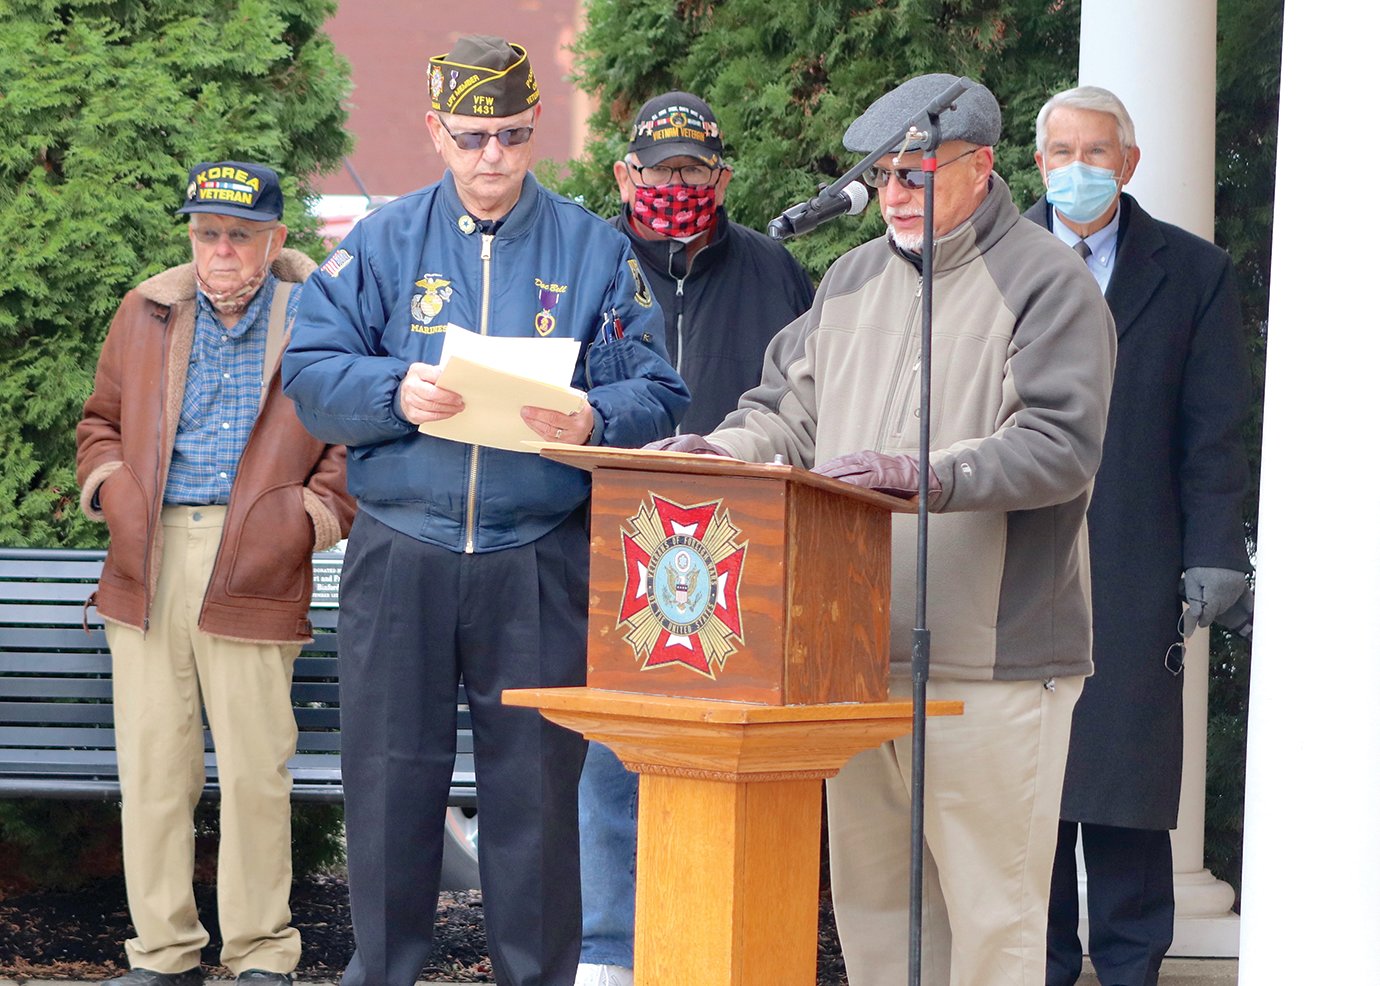 City Council President Andy Biddle delivers the commencement speech Wednesday at Canine Plaza for Crawfordsville's annual Veterans Day ceremony. Biddle delivered the speech on behalf of Mayor Todd Barton, who was unable to attend this year.